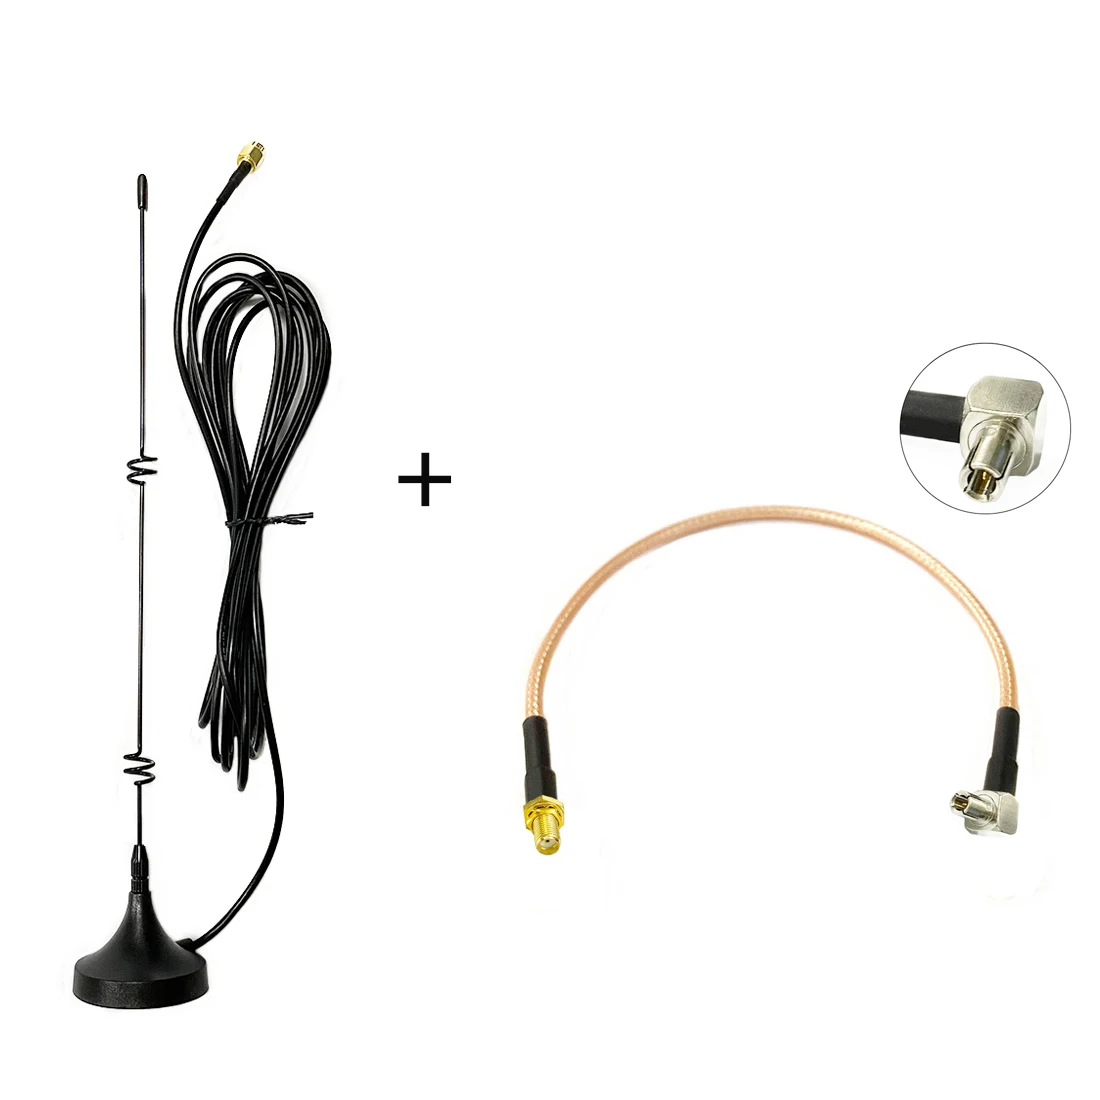 4G 3G GSM Antenna 6dbi High Gain Magnetic Base with 3meters Cable SMA Male +SMA Female Connector  to TS9 Male RG316 Cable 15cm yagi antenna 20e 6dbi outdoor directional antenna 470 862mhz f female connector terrestrial dvb t t2 digital video broadcasting